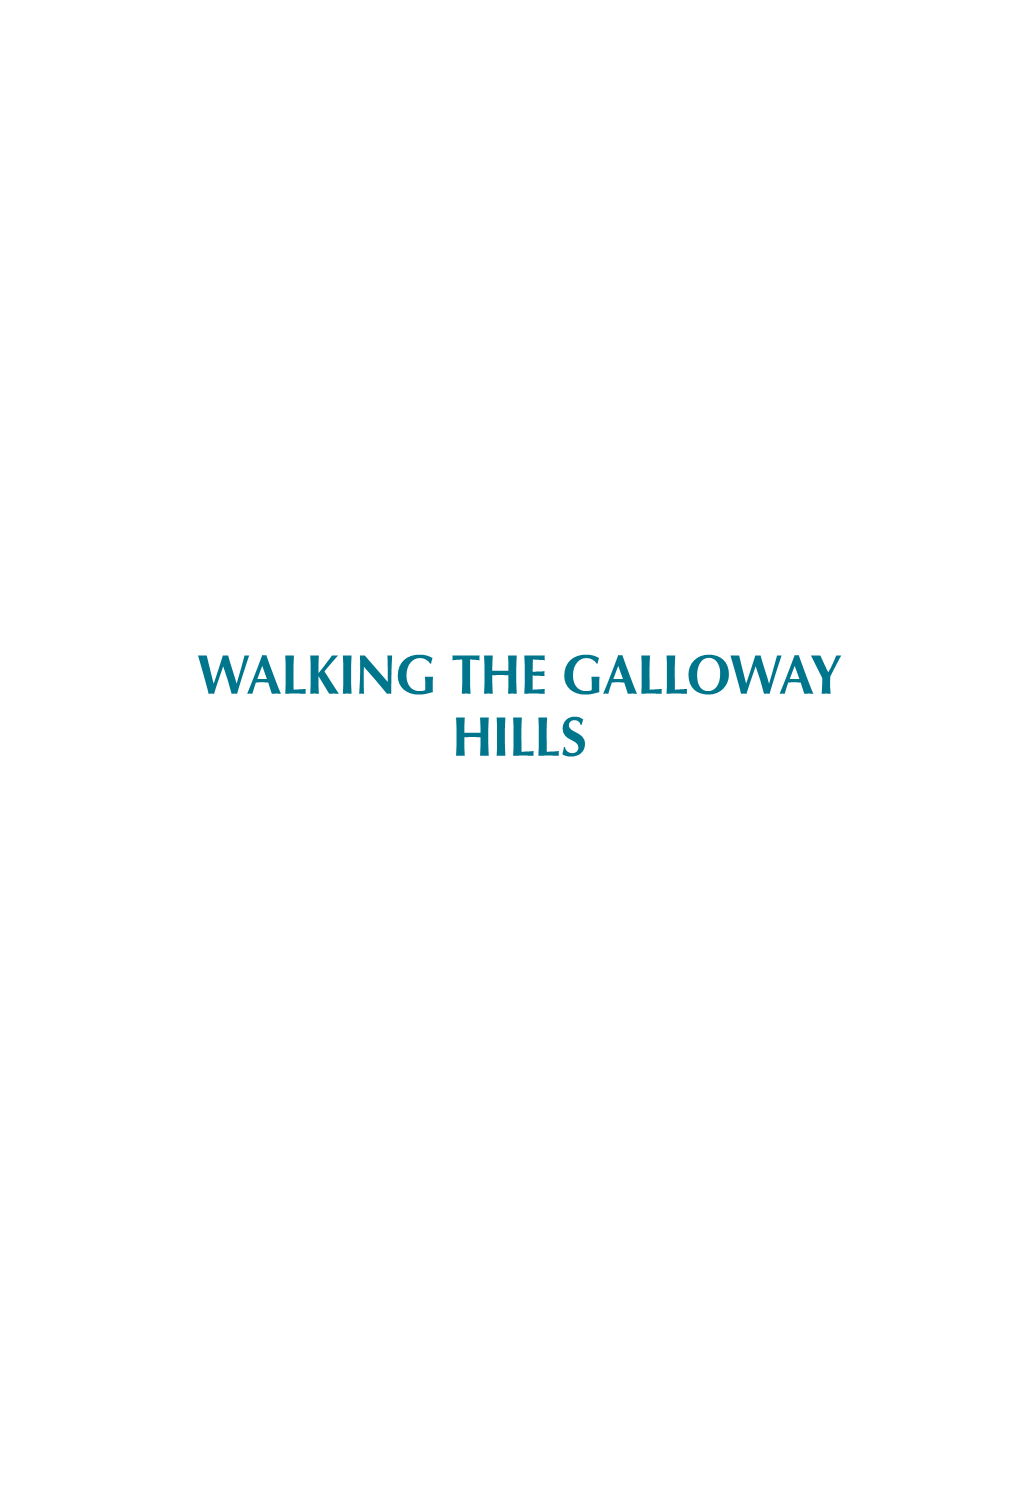 WALKING the GALLOWAY HILLS About the Author Ronald Turnbull Was Born in St Andrews, Scotland, Into an Energetic Fellwalking Family